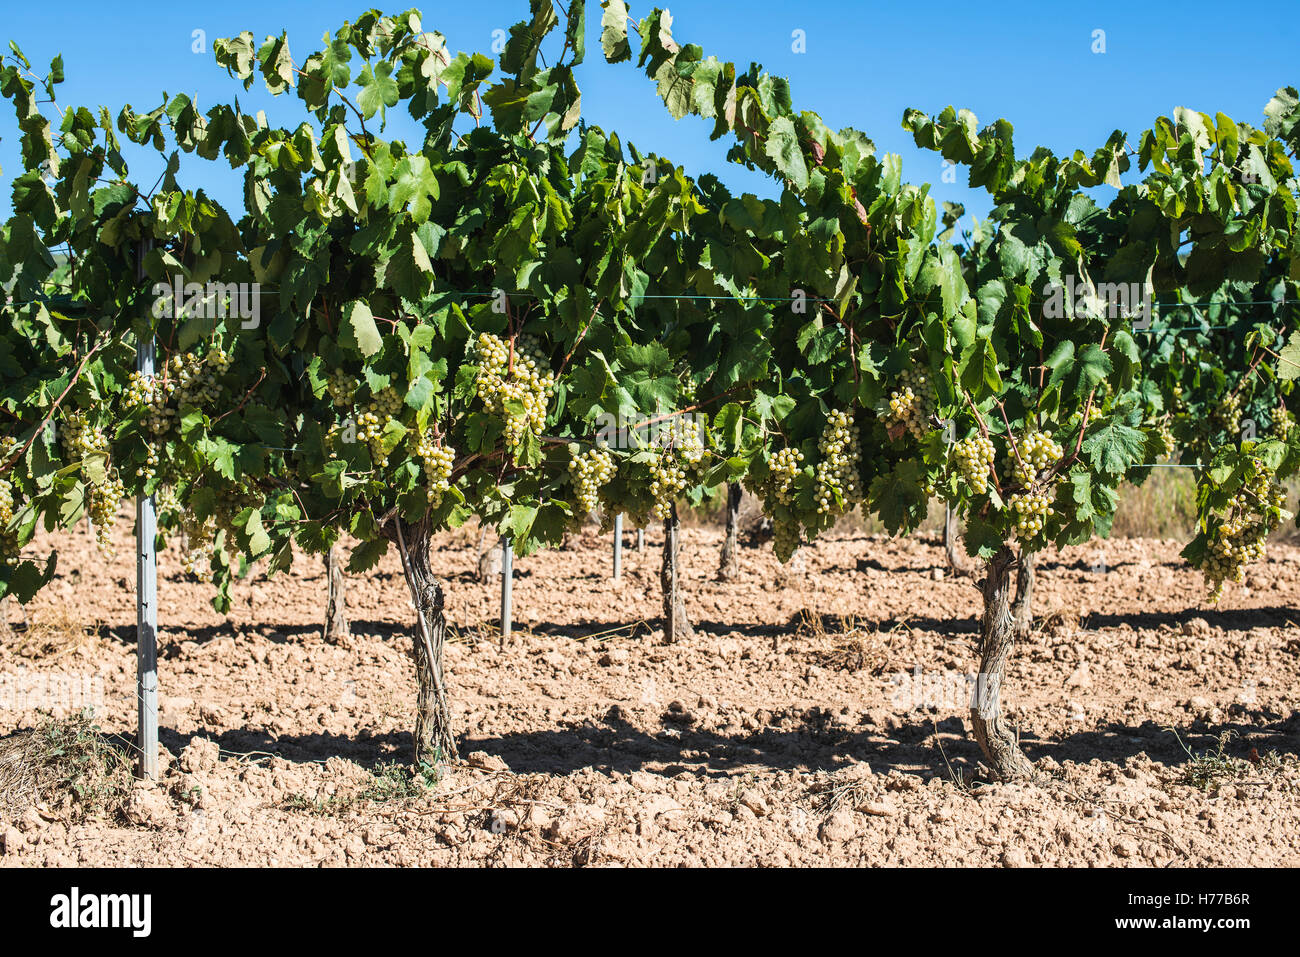 Vines in a vineyard Stock Photo